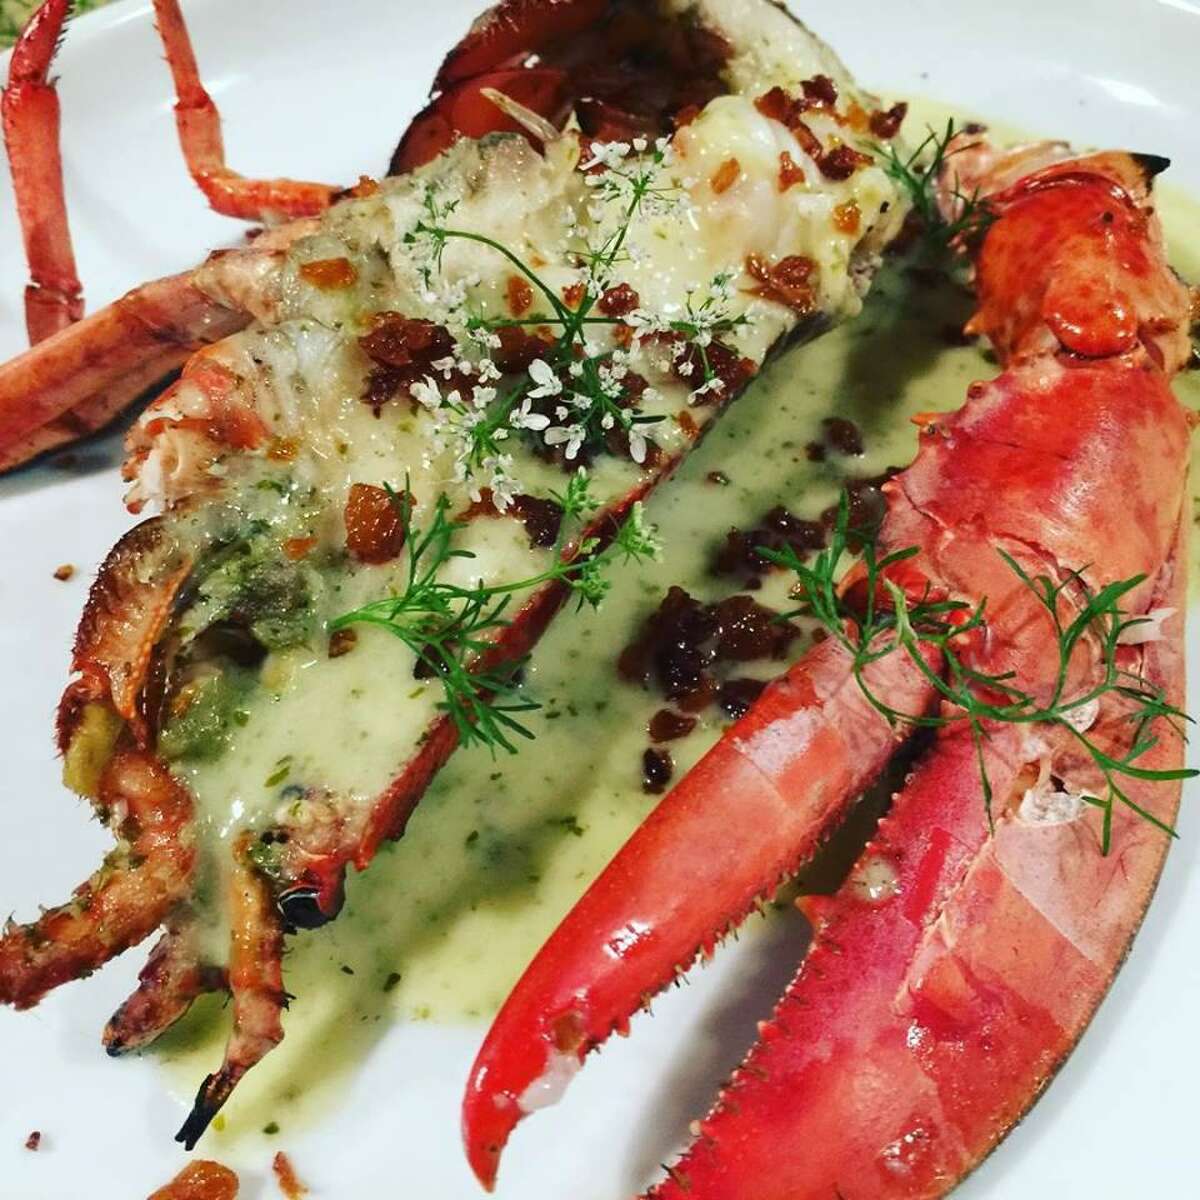 Half and whole lobster dishes will be on the menu when Rebelle takes on a new identity as a seafood-centric restaurant on Monday.